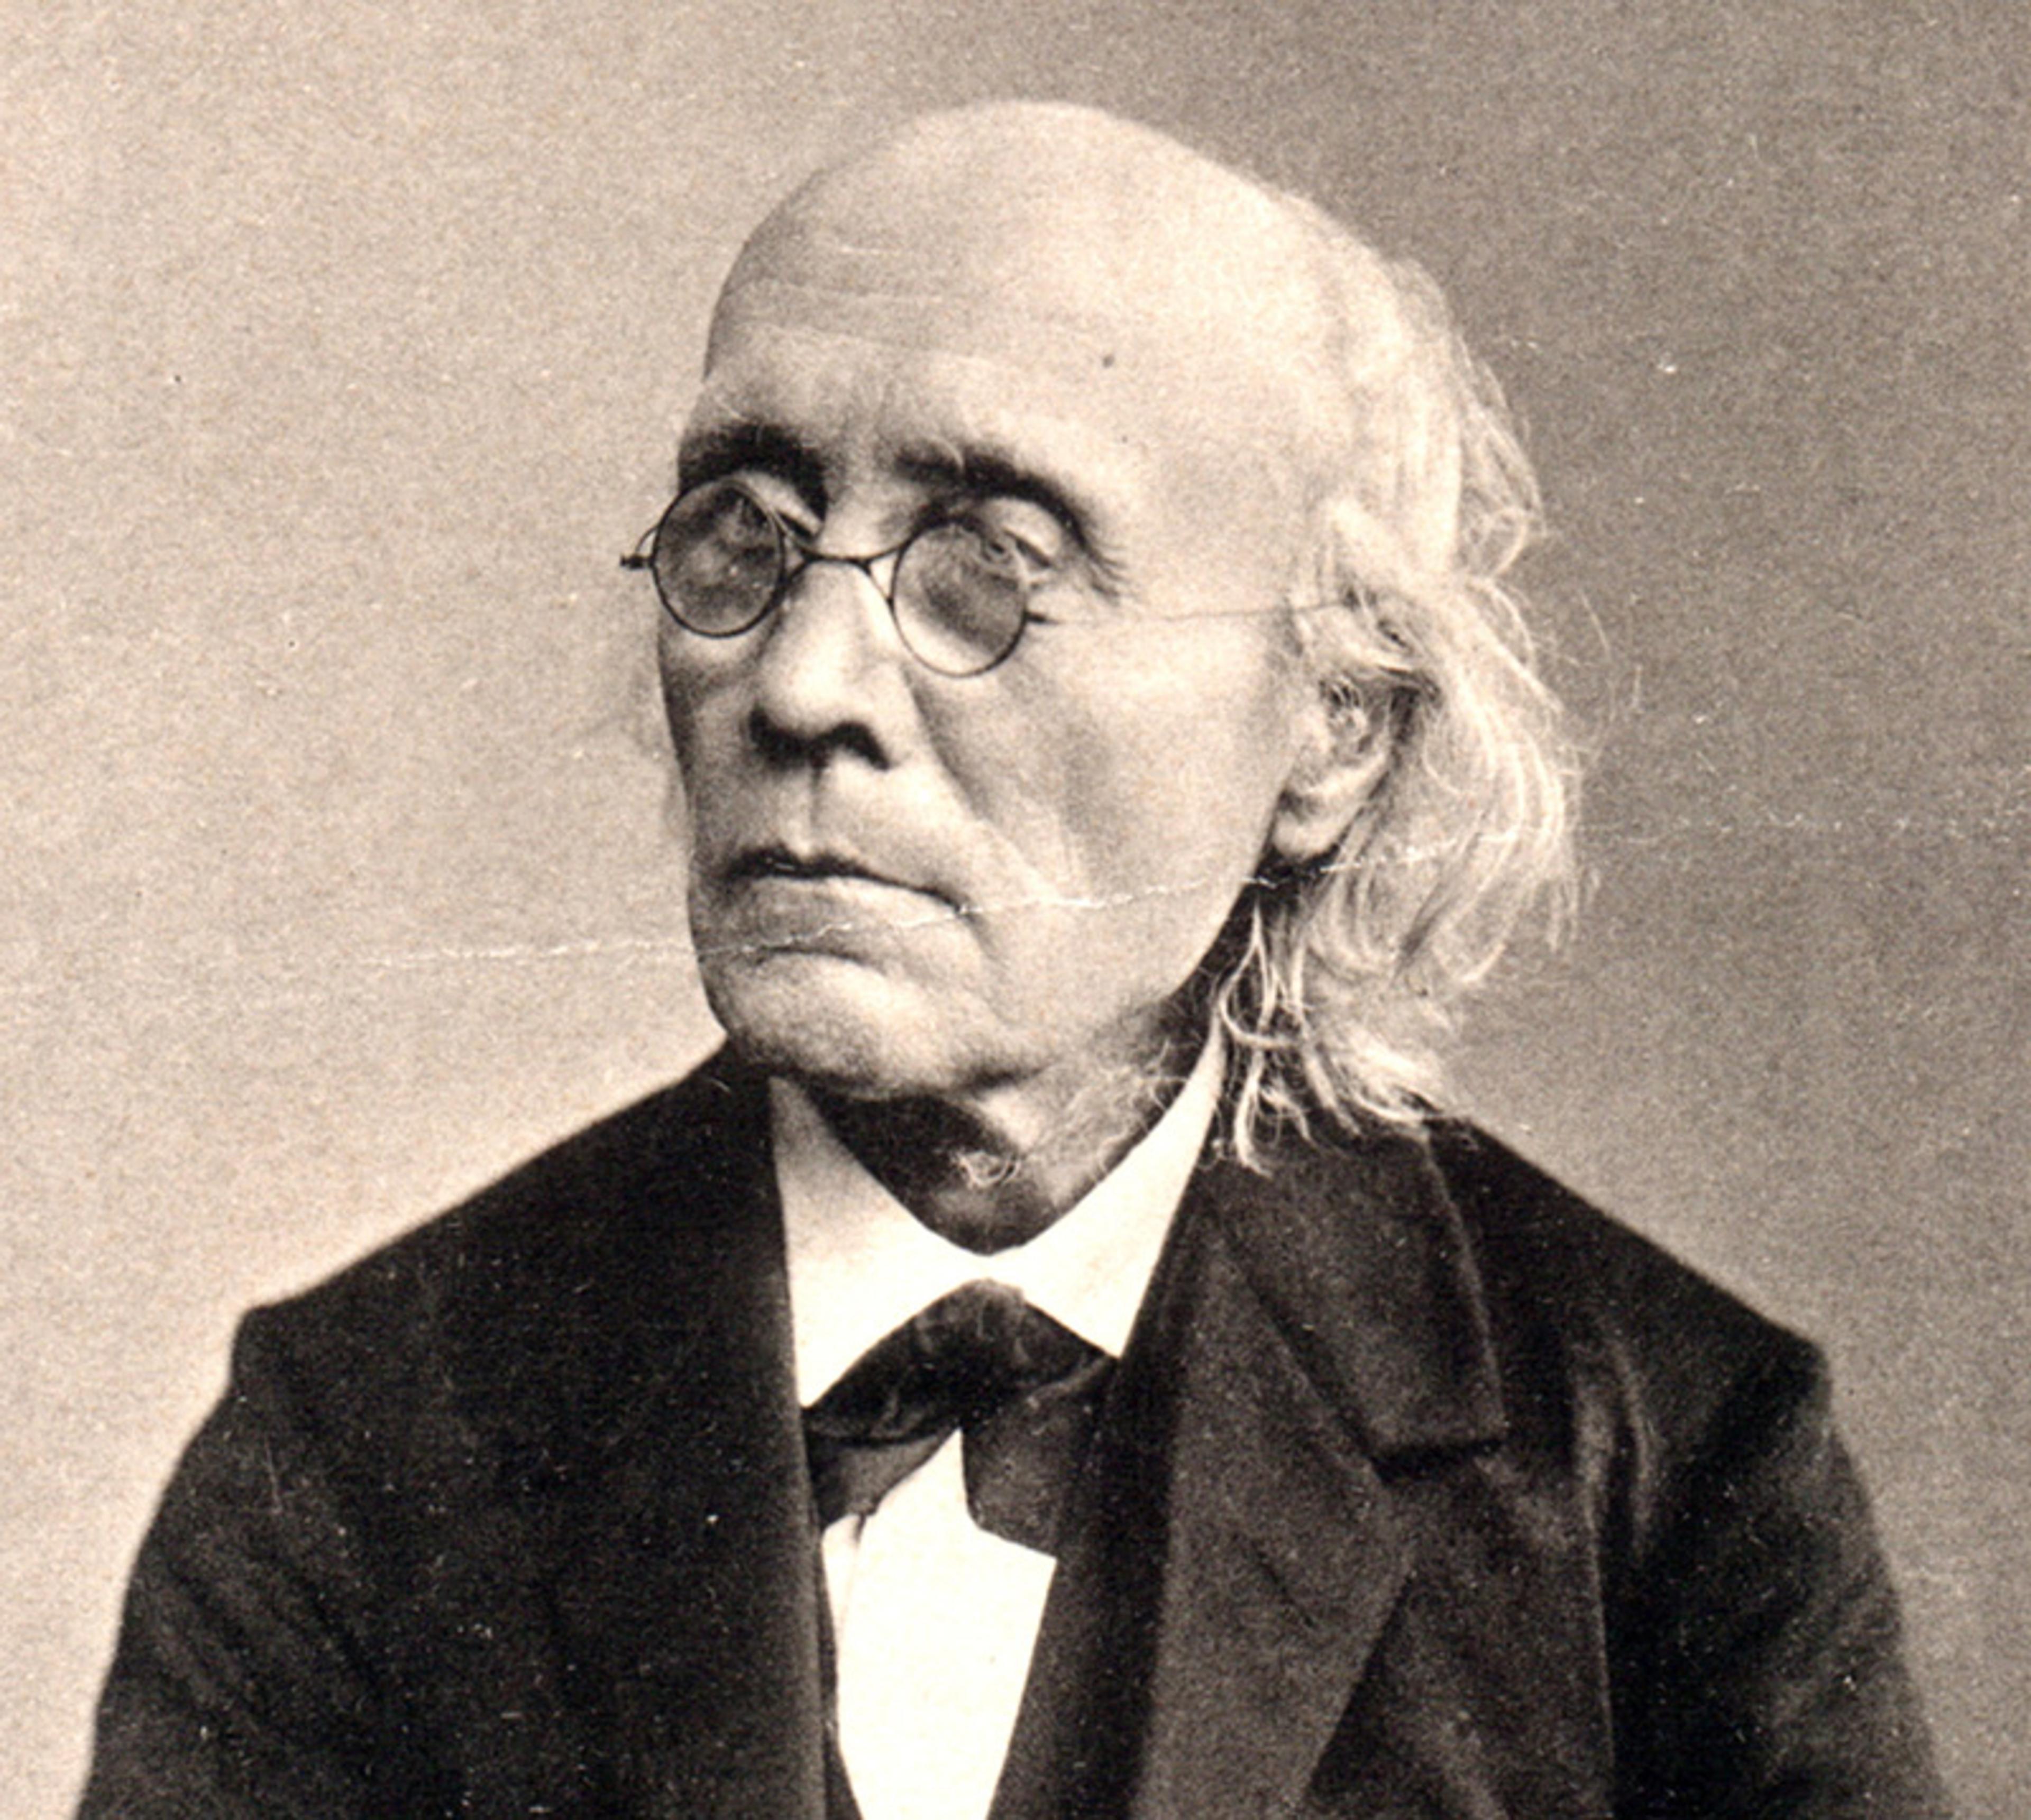 Sepia-toned portrait of an elderly man with glasses, a bald head, long hair, and dressed in formal clothing.